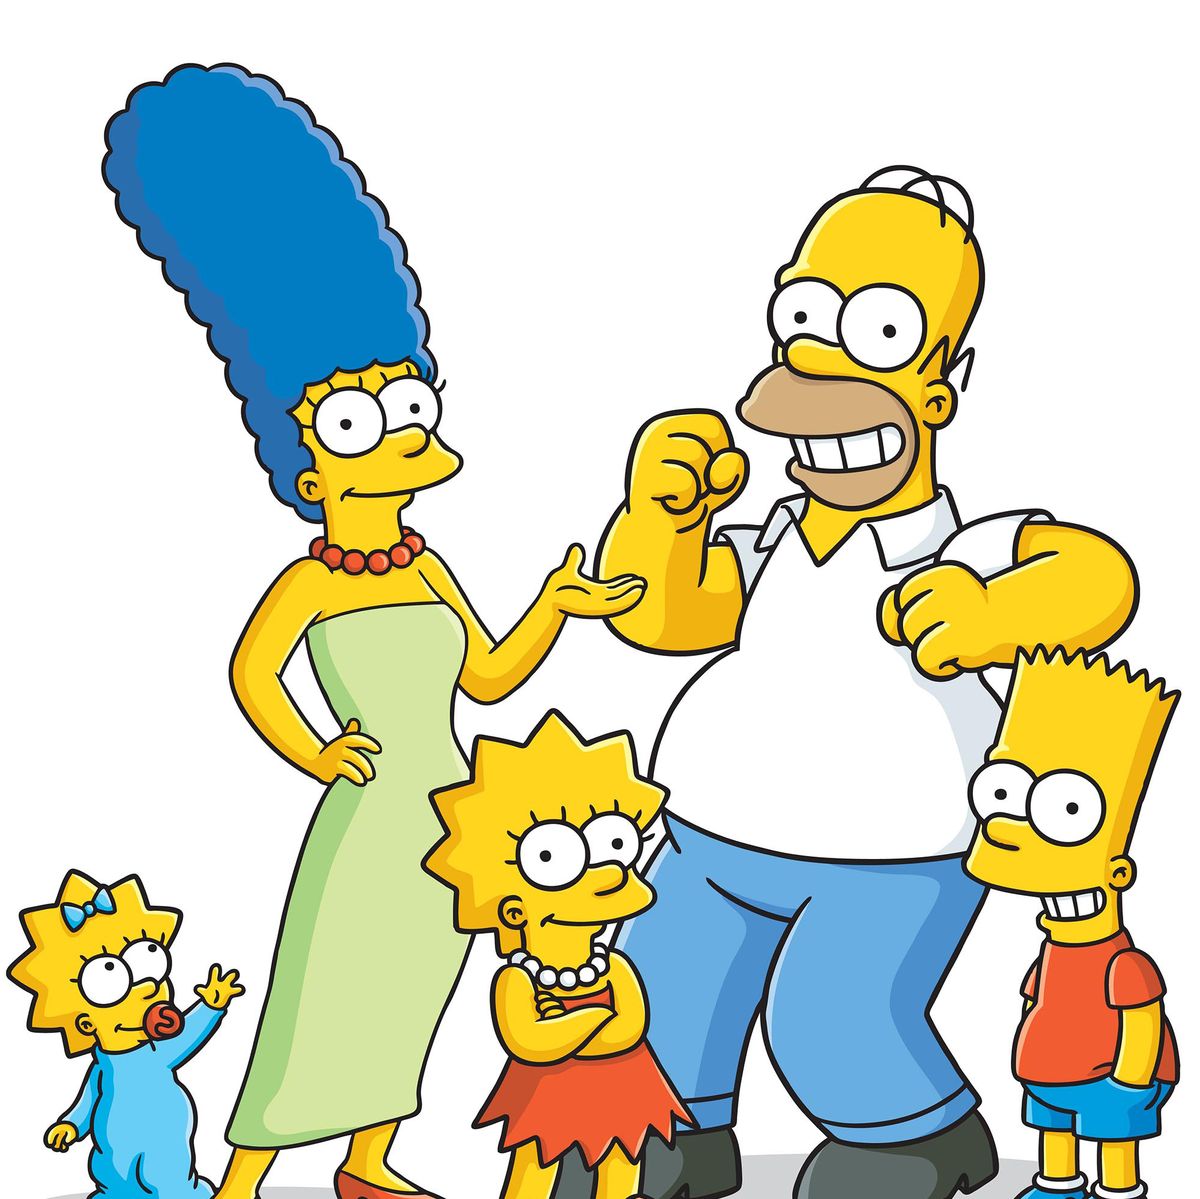 Who Writes 'The Simpsons?